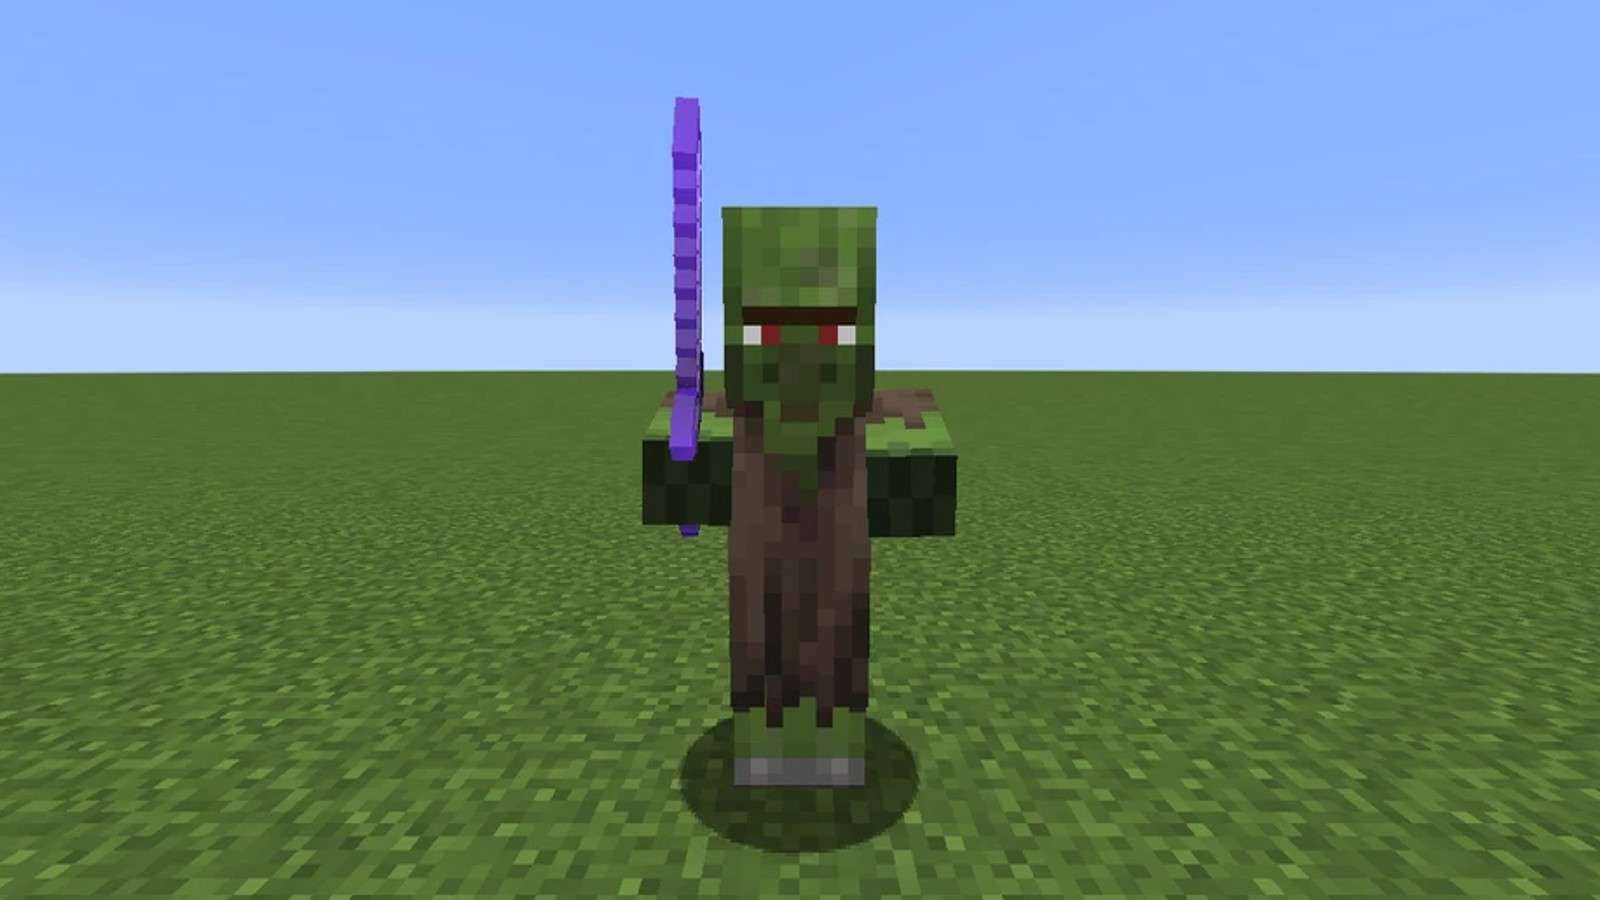 An image of a zombie villager holding a sword in Minecraft.